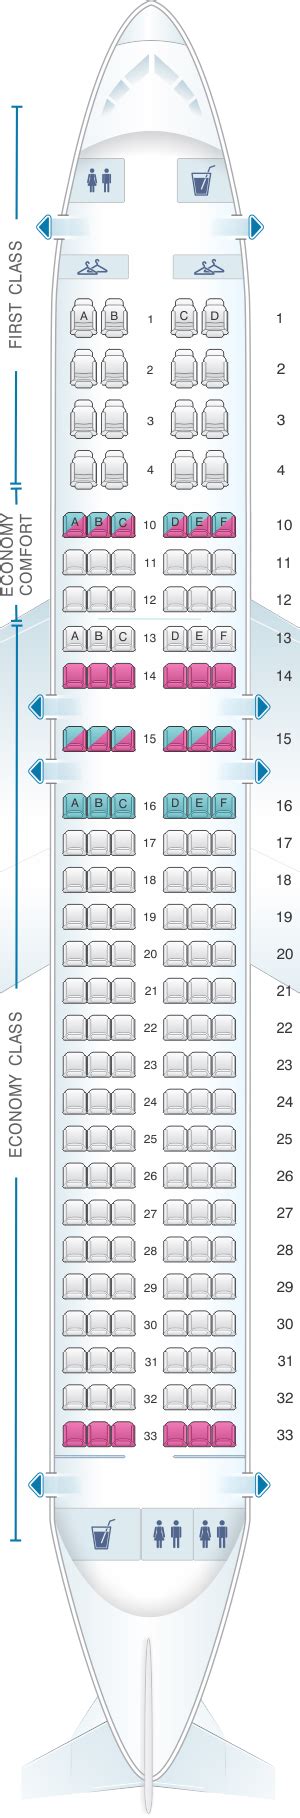 33 Delta A321 Seat Map Maps Database Source